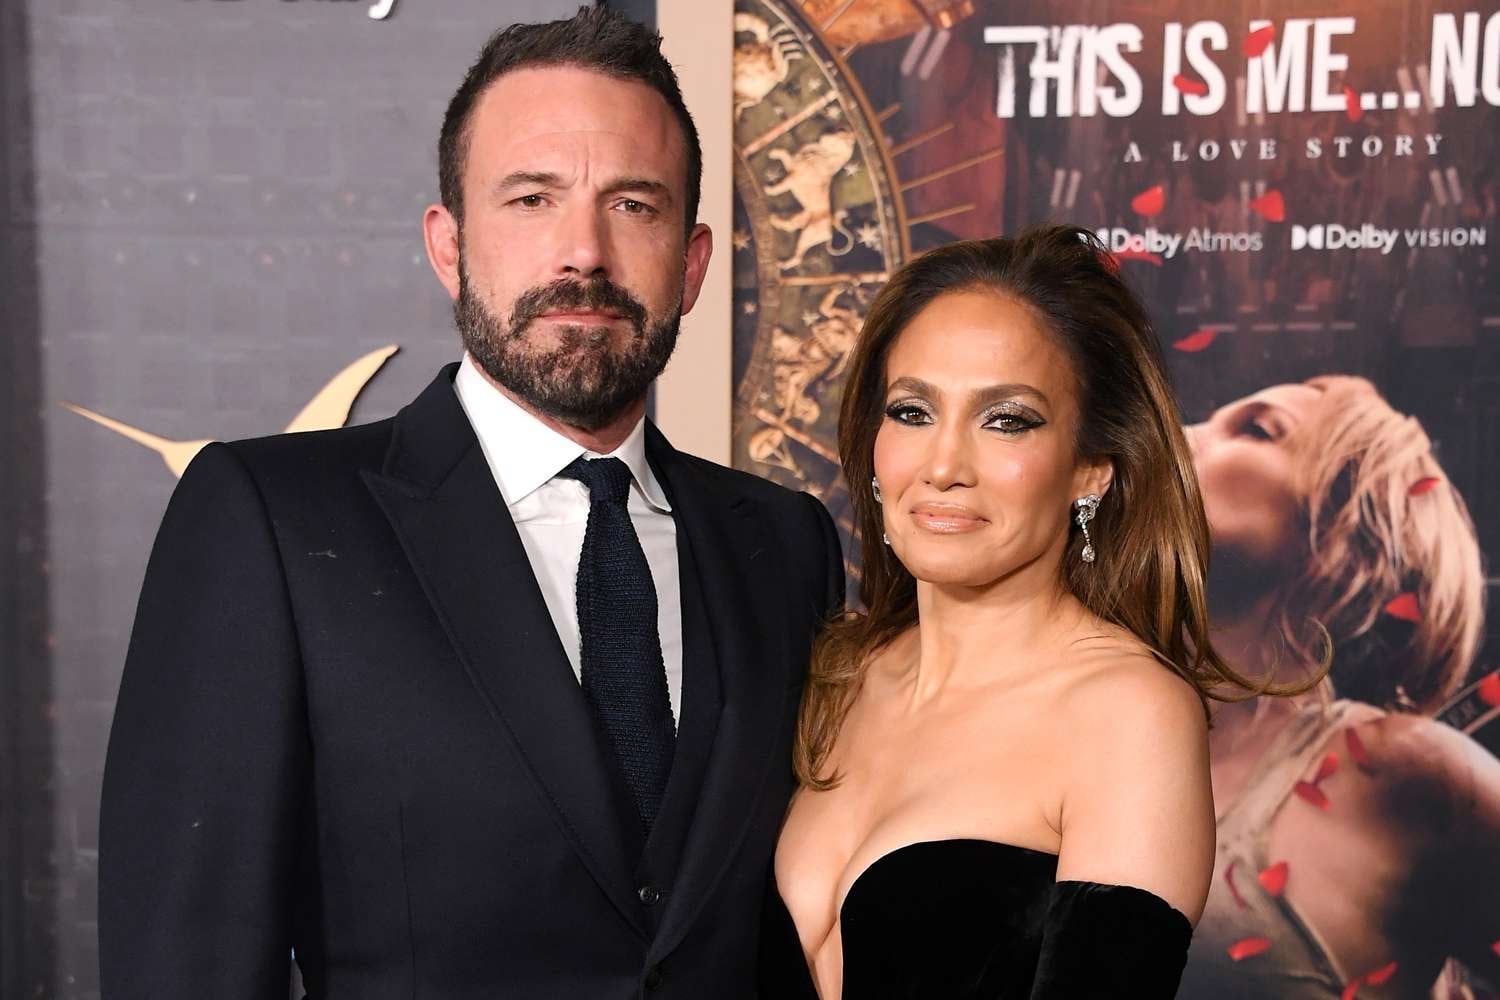 Jennifer Lopez and Ben Affleck 'Want to Put the Kids First' During